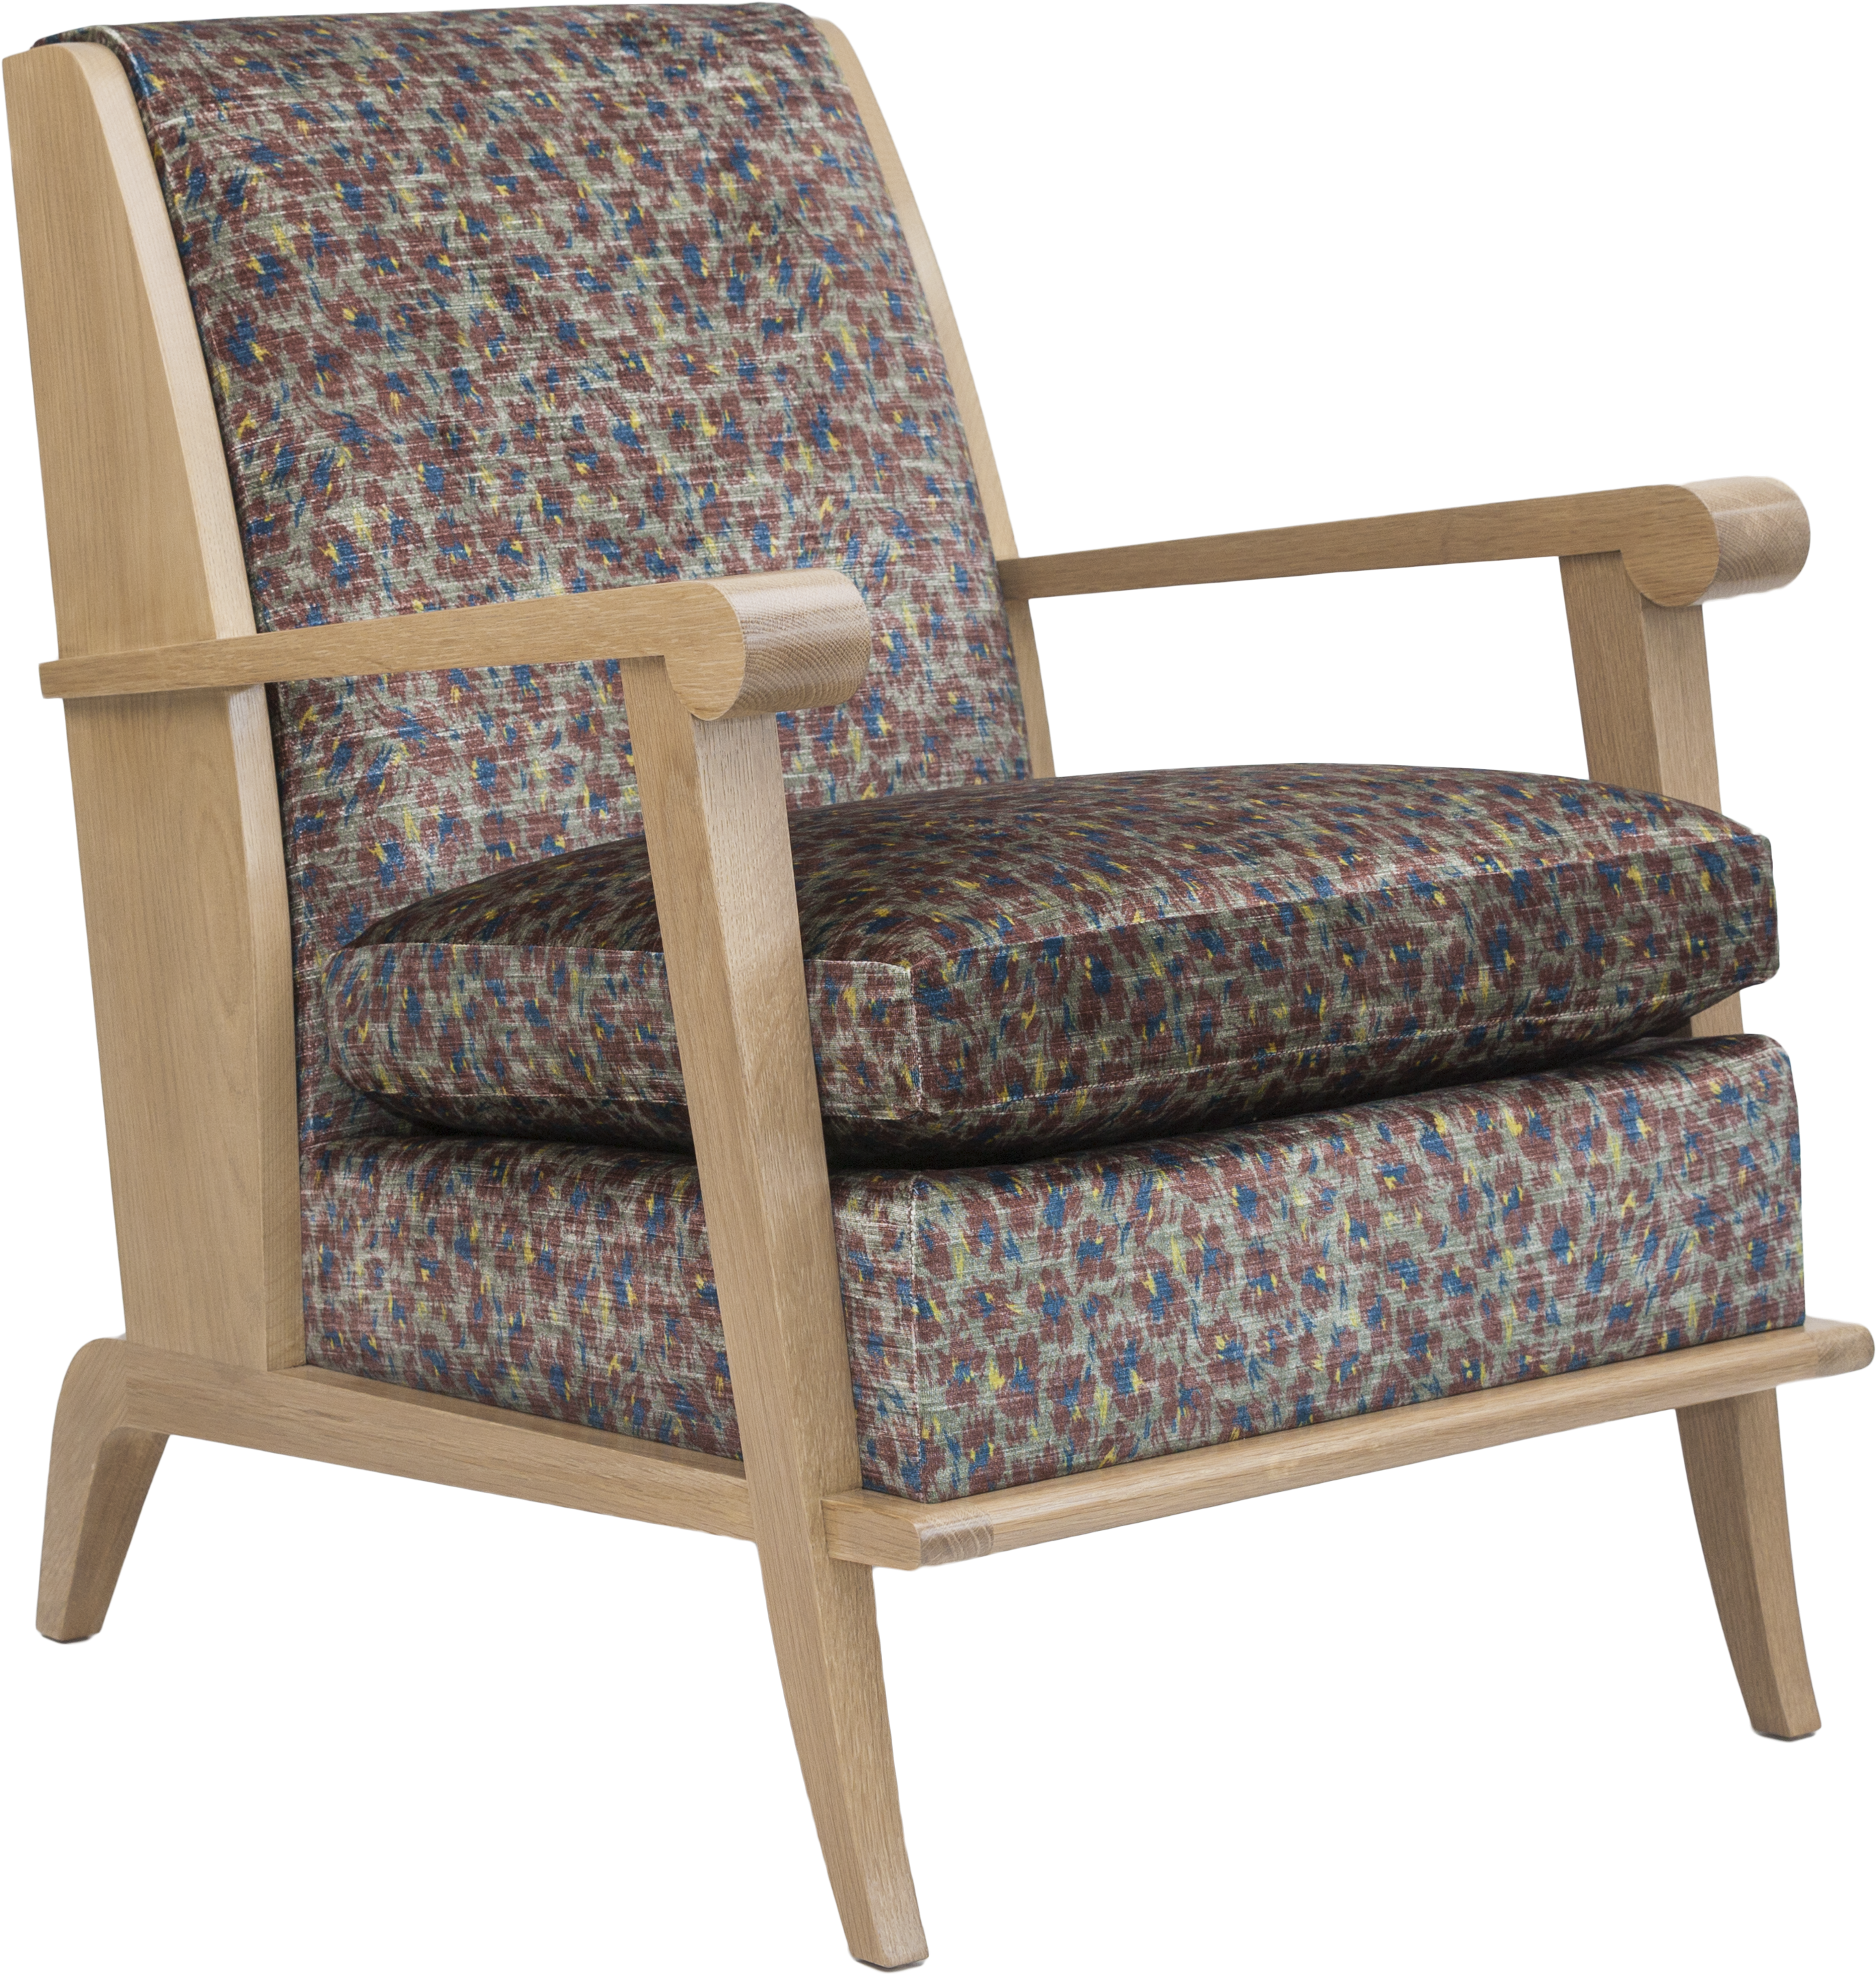 Modern Club Chair With Patterned Upholstery